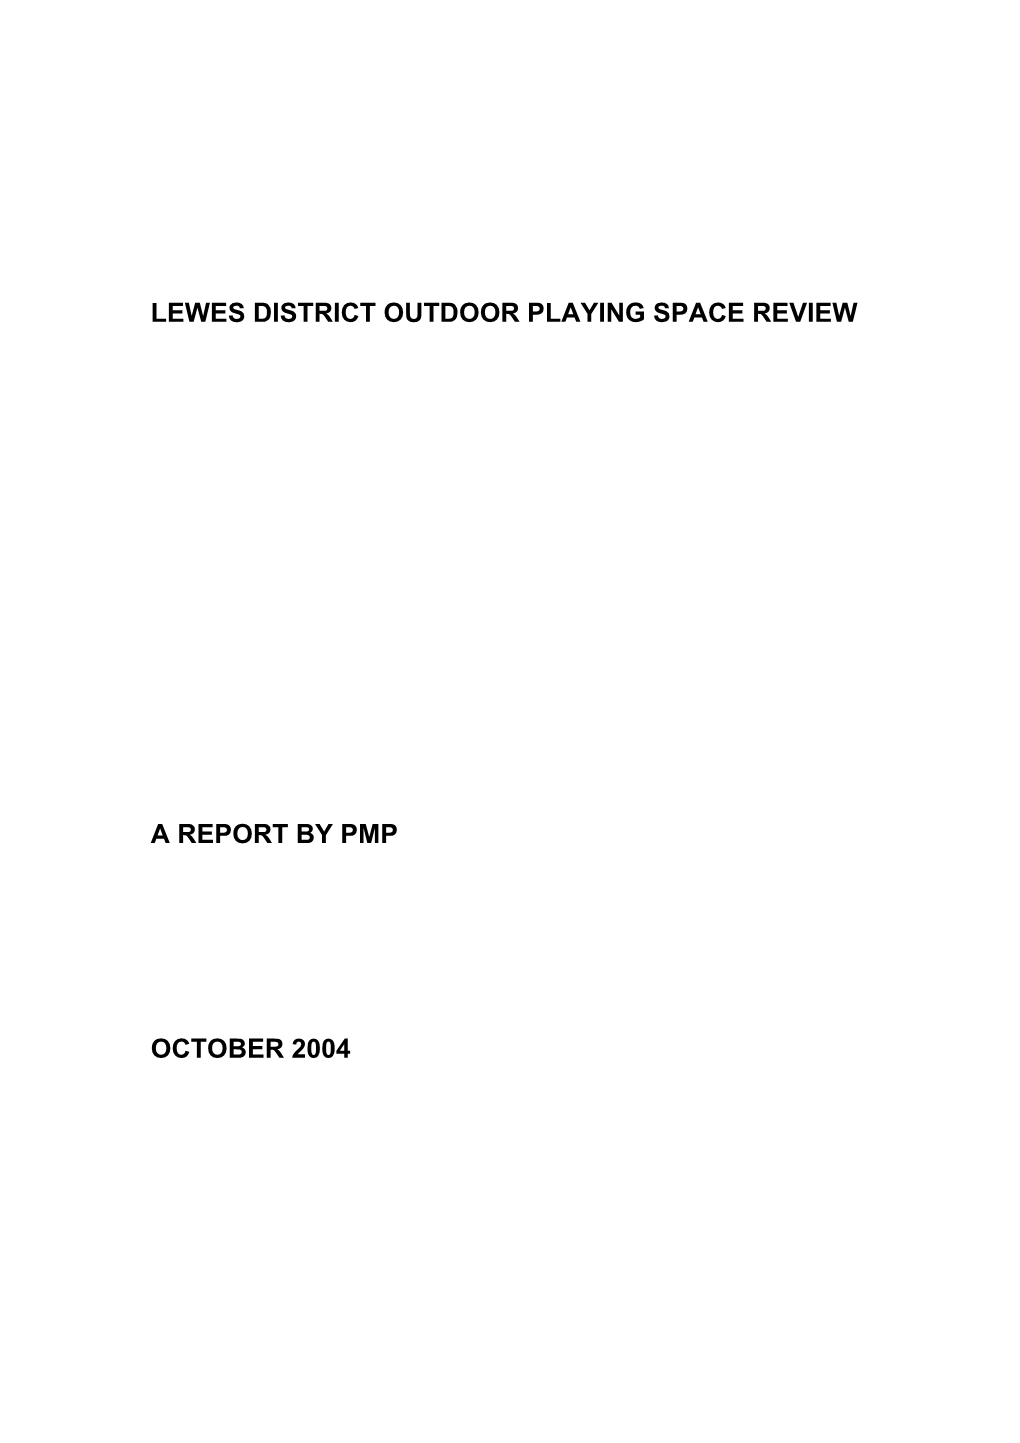 Lewes District Outdoor Playing Space Review 2004